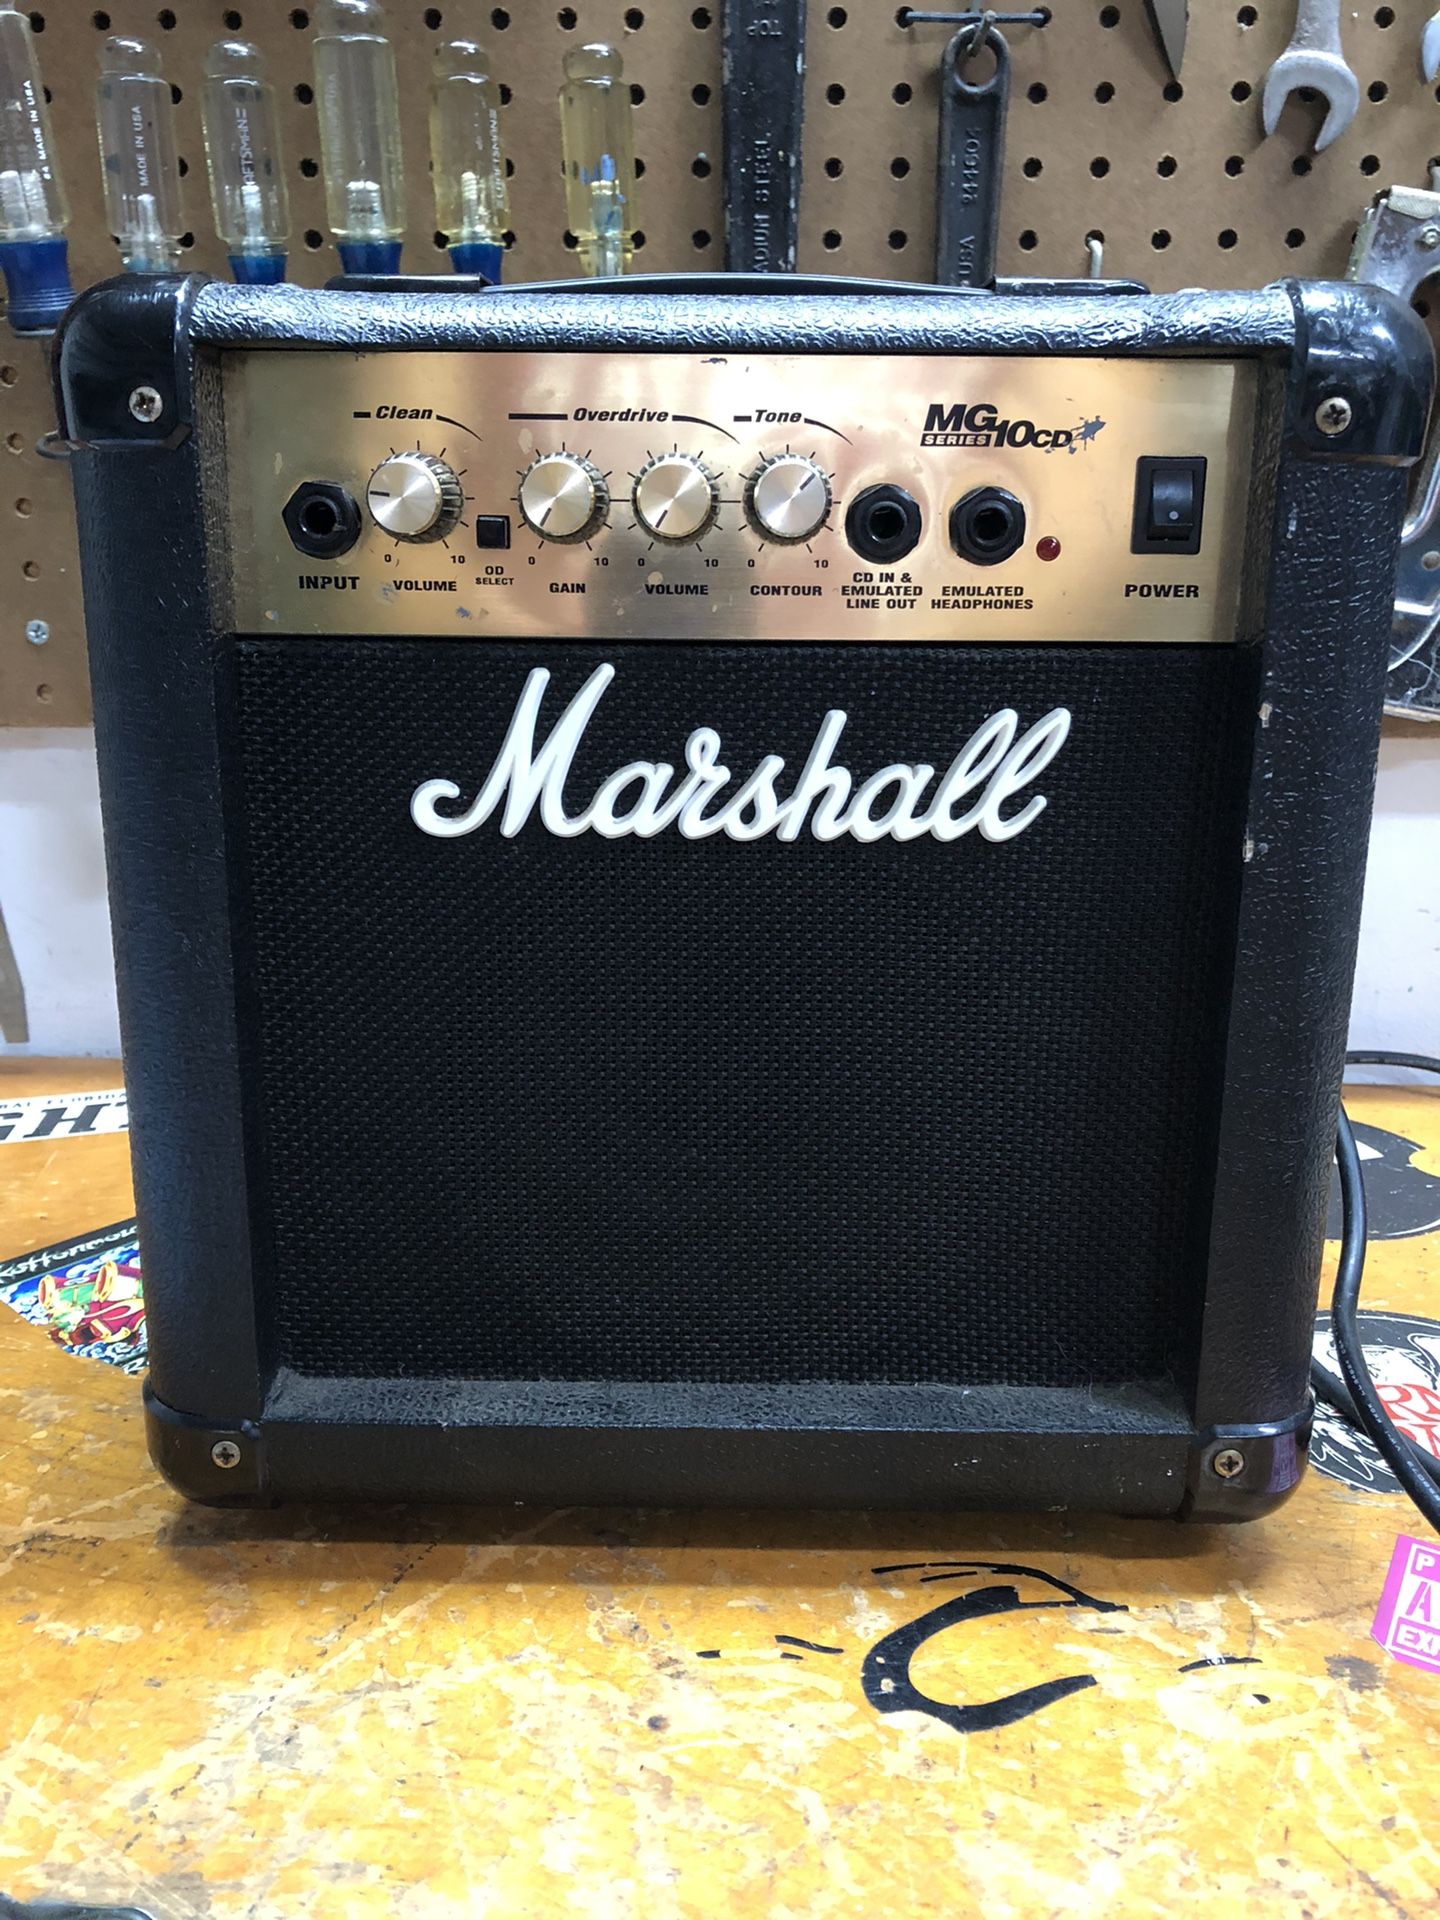 Marshall Electric Guitar Amp Amplifier